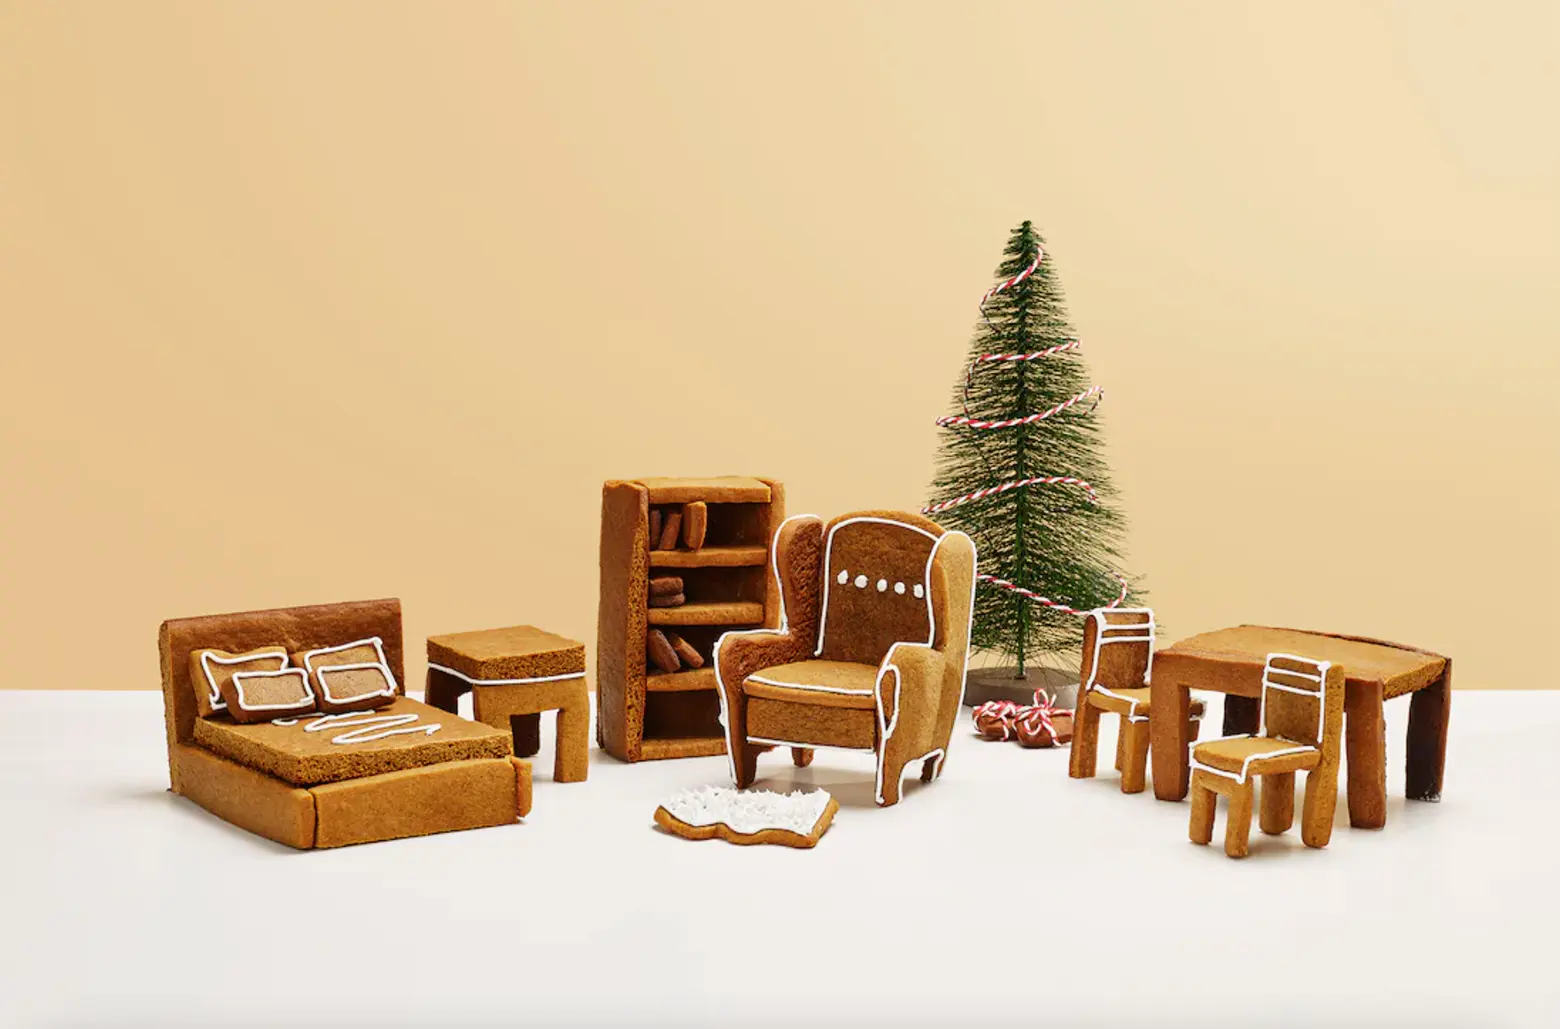 This fun gingerbread house lets you build mini IKEA furniture at home